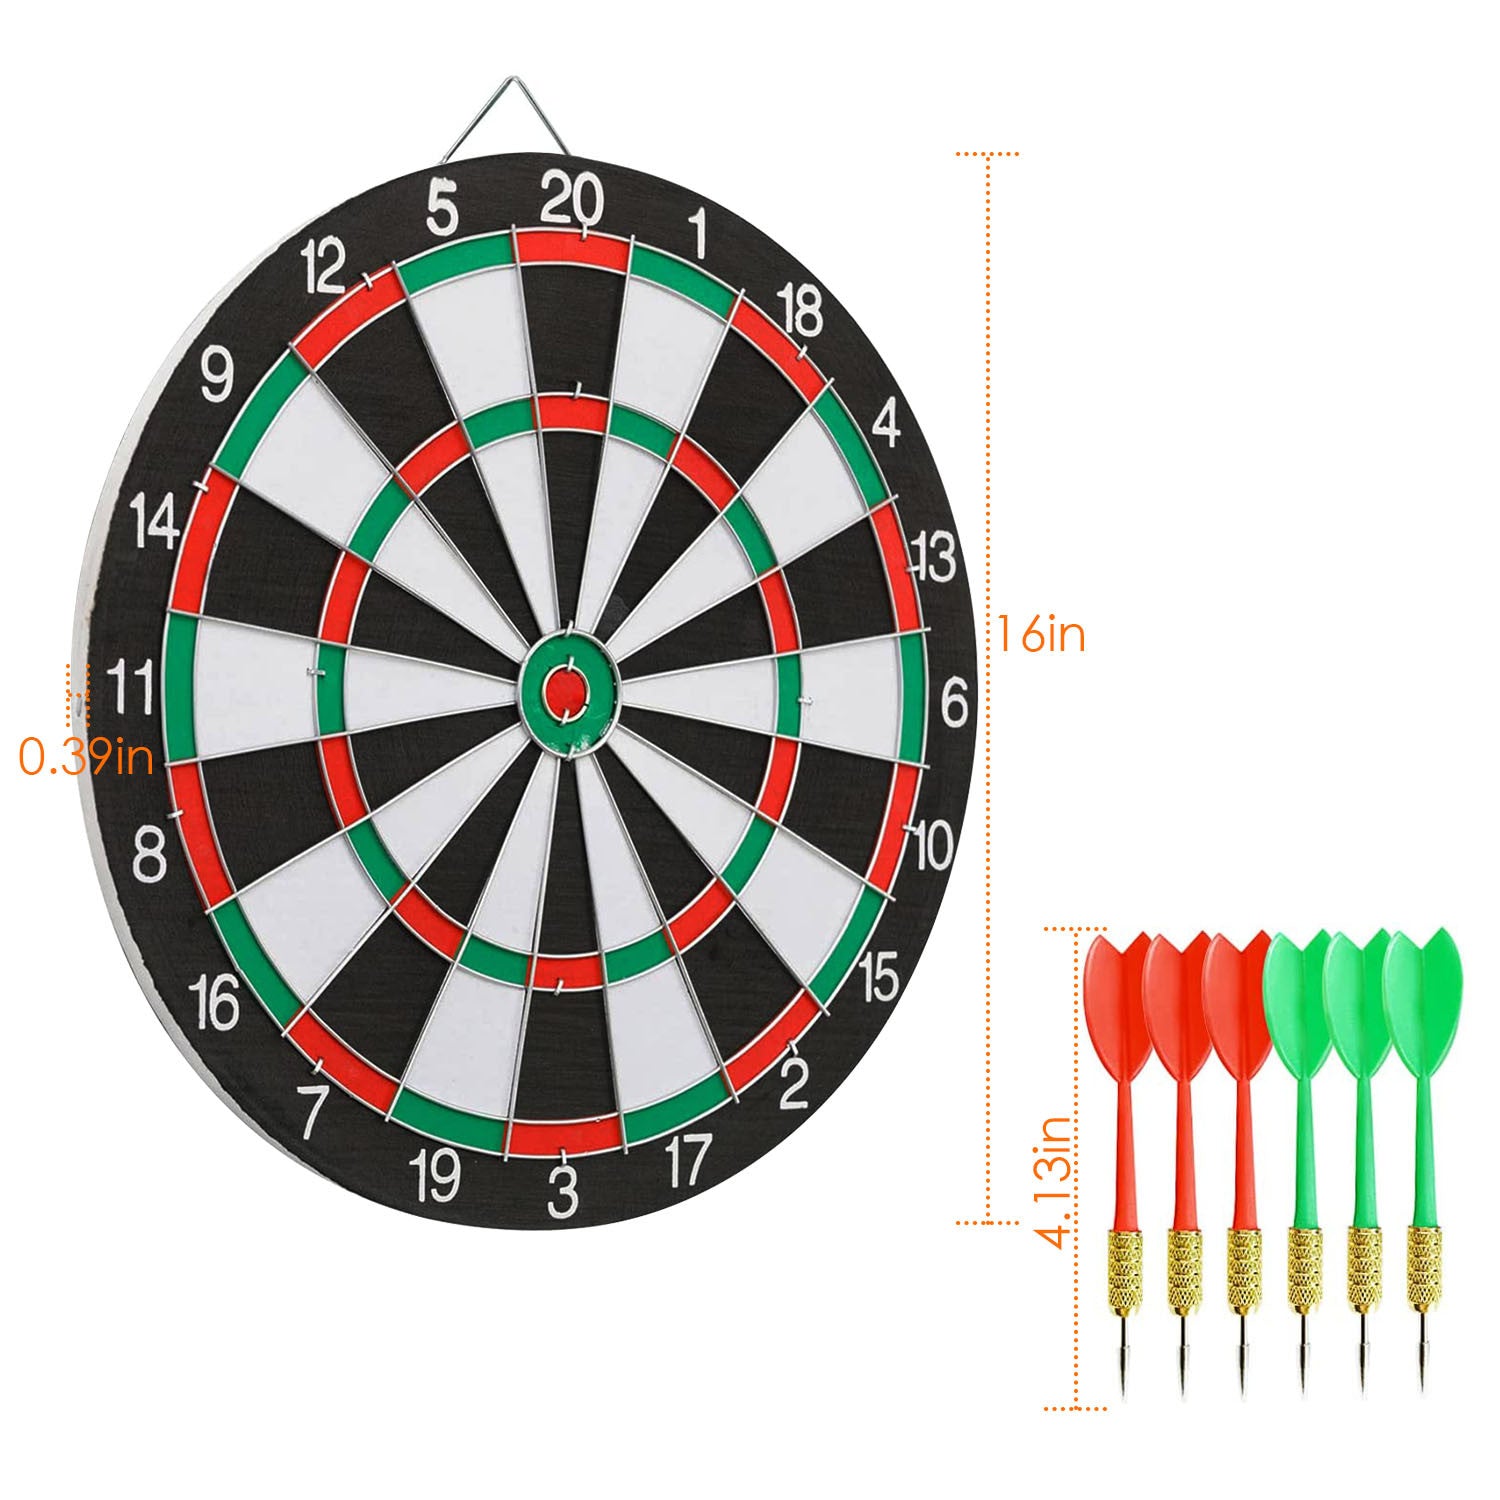 16in Dart Board Game Set 6 Steel Tip Darts Double-sided Dartboard Outdoor Indoor Party Game Set with six darts (three red, three green) embedded in various scoring areas, isolated on a white background.